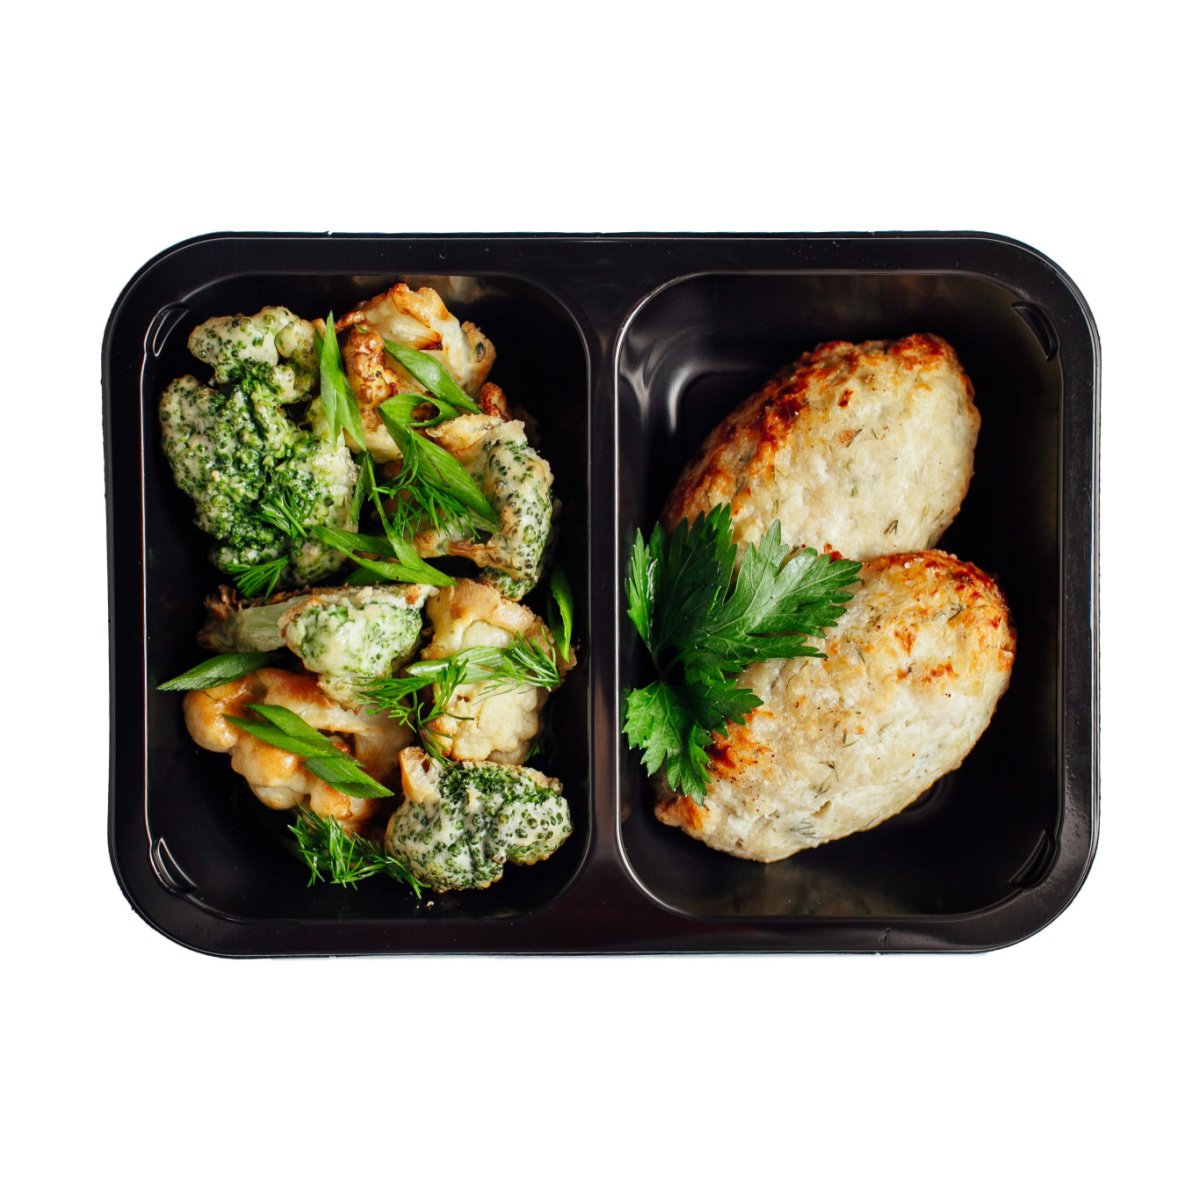 healthy packed lunch meal in plastic container box